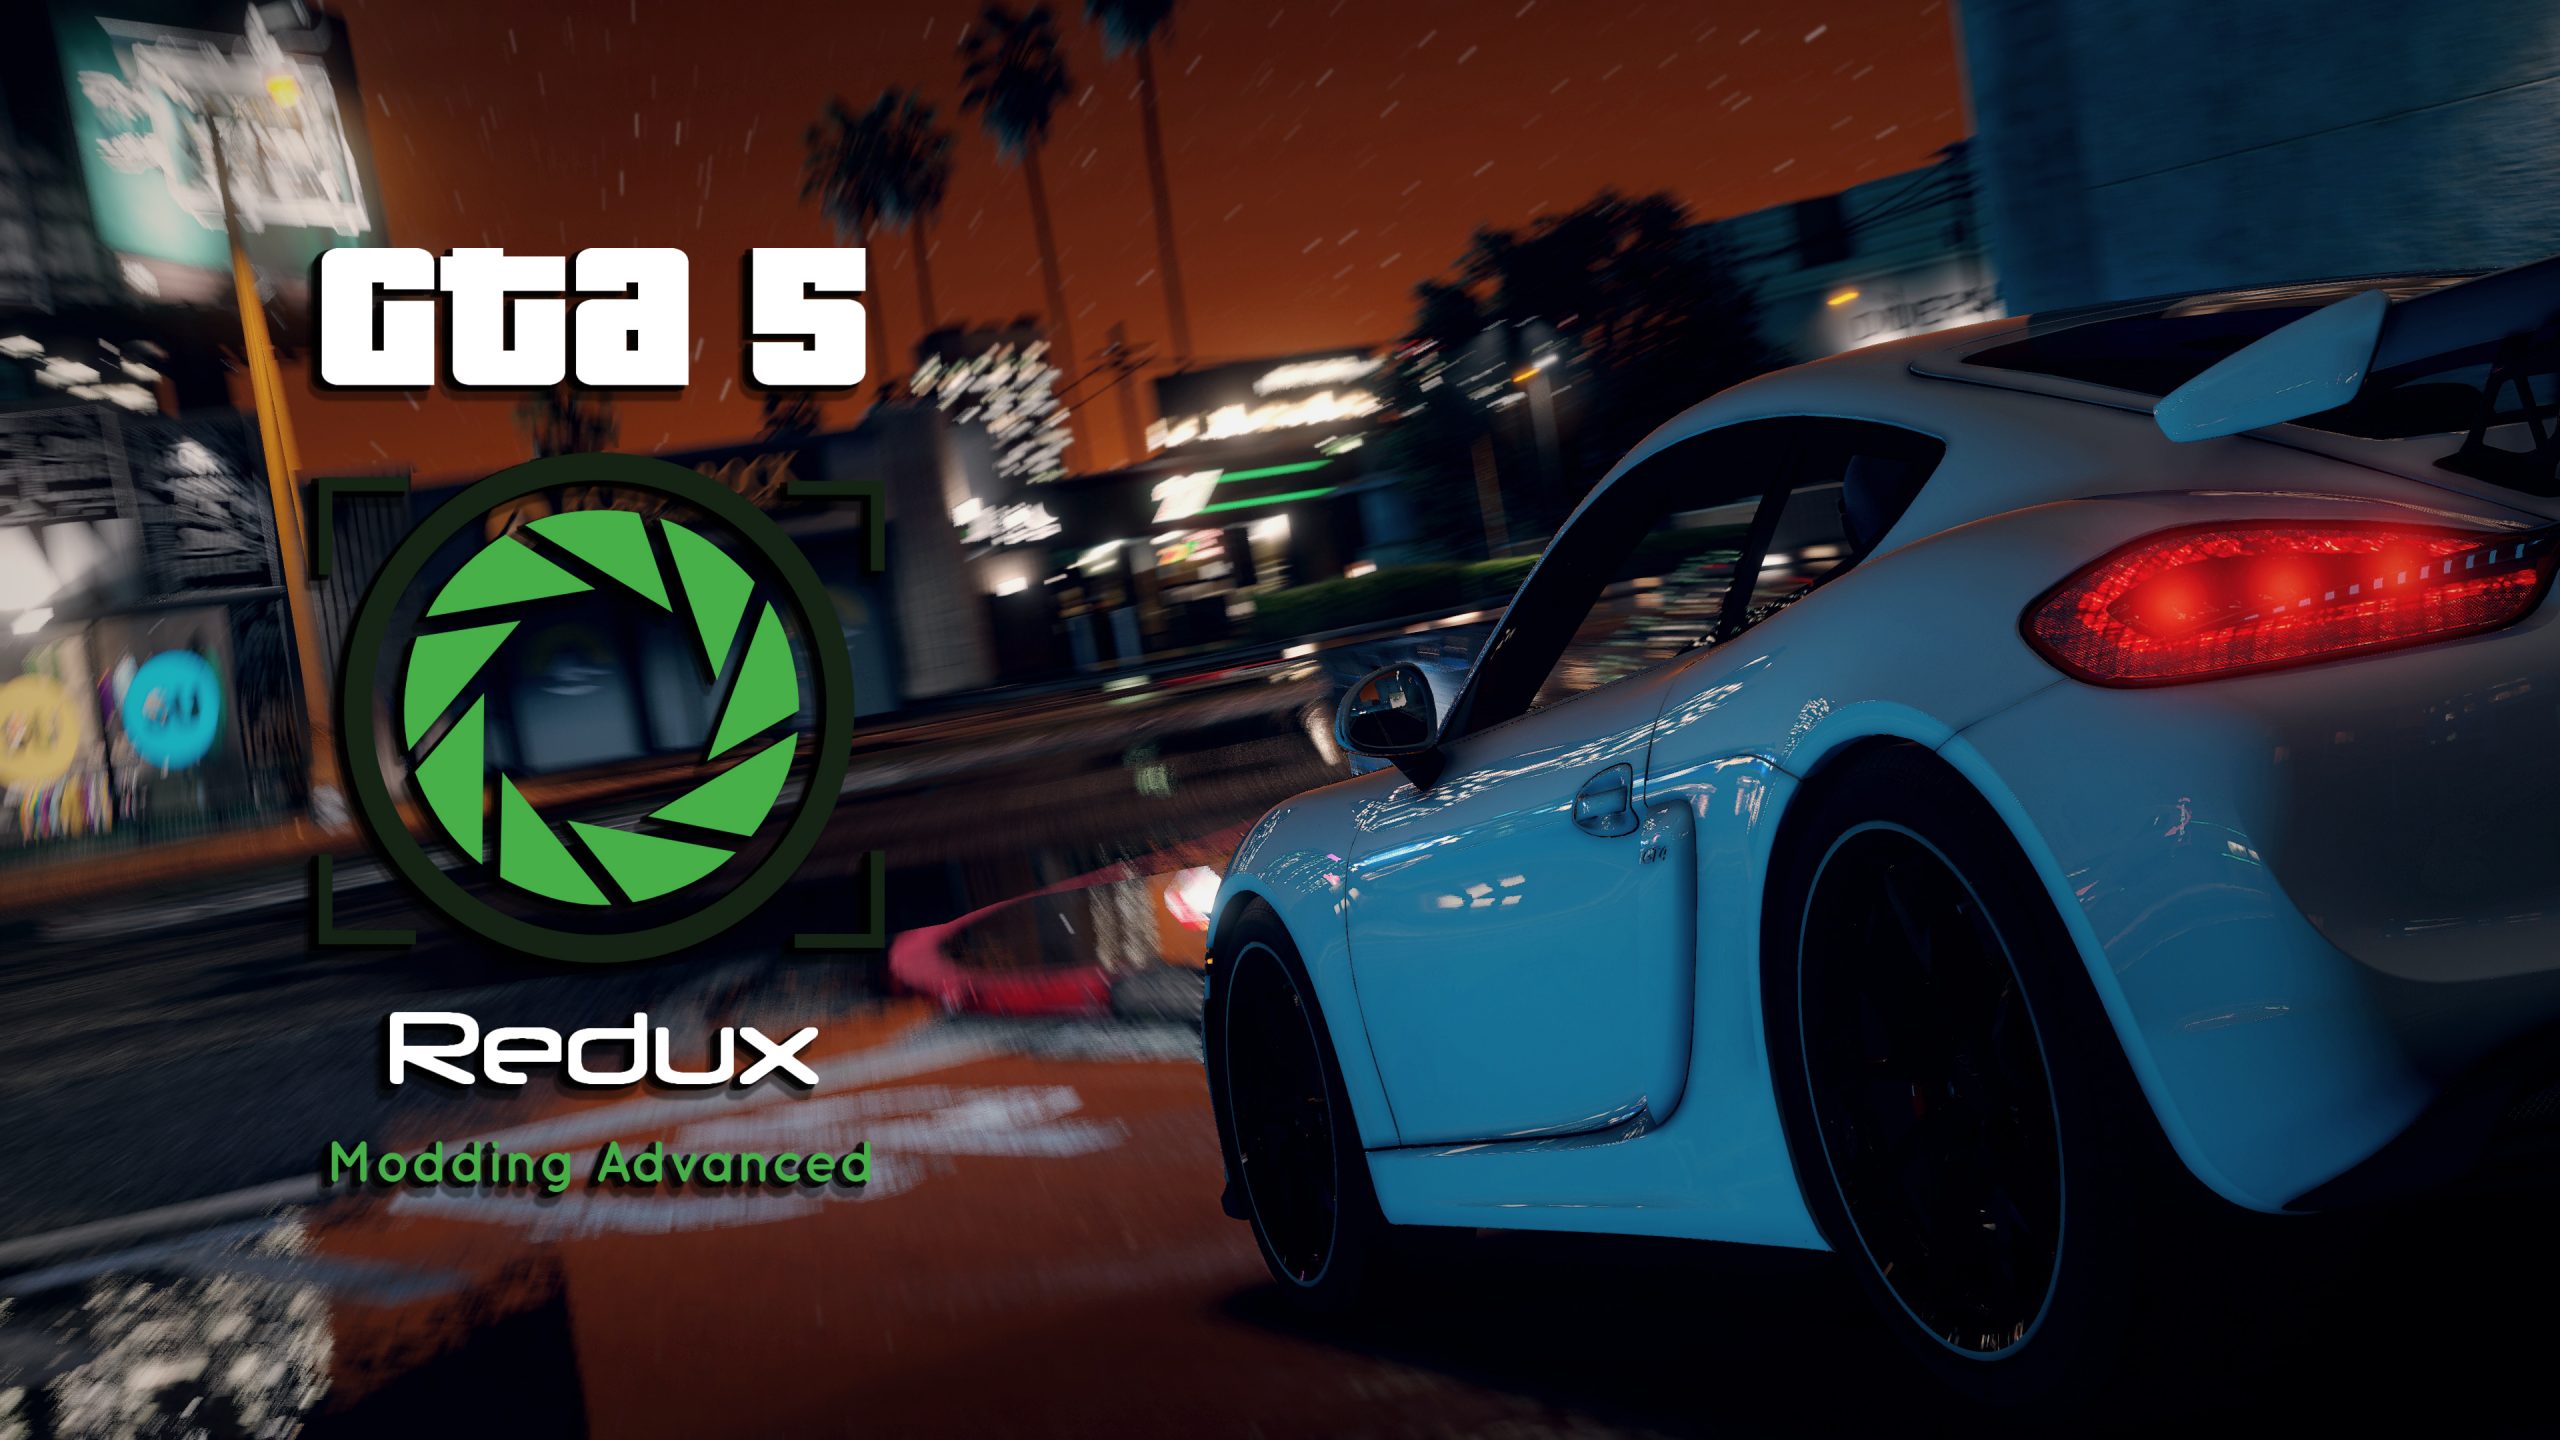 GTA 5 Redux free full pc game for Download